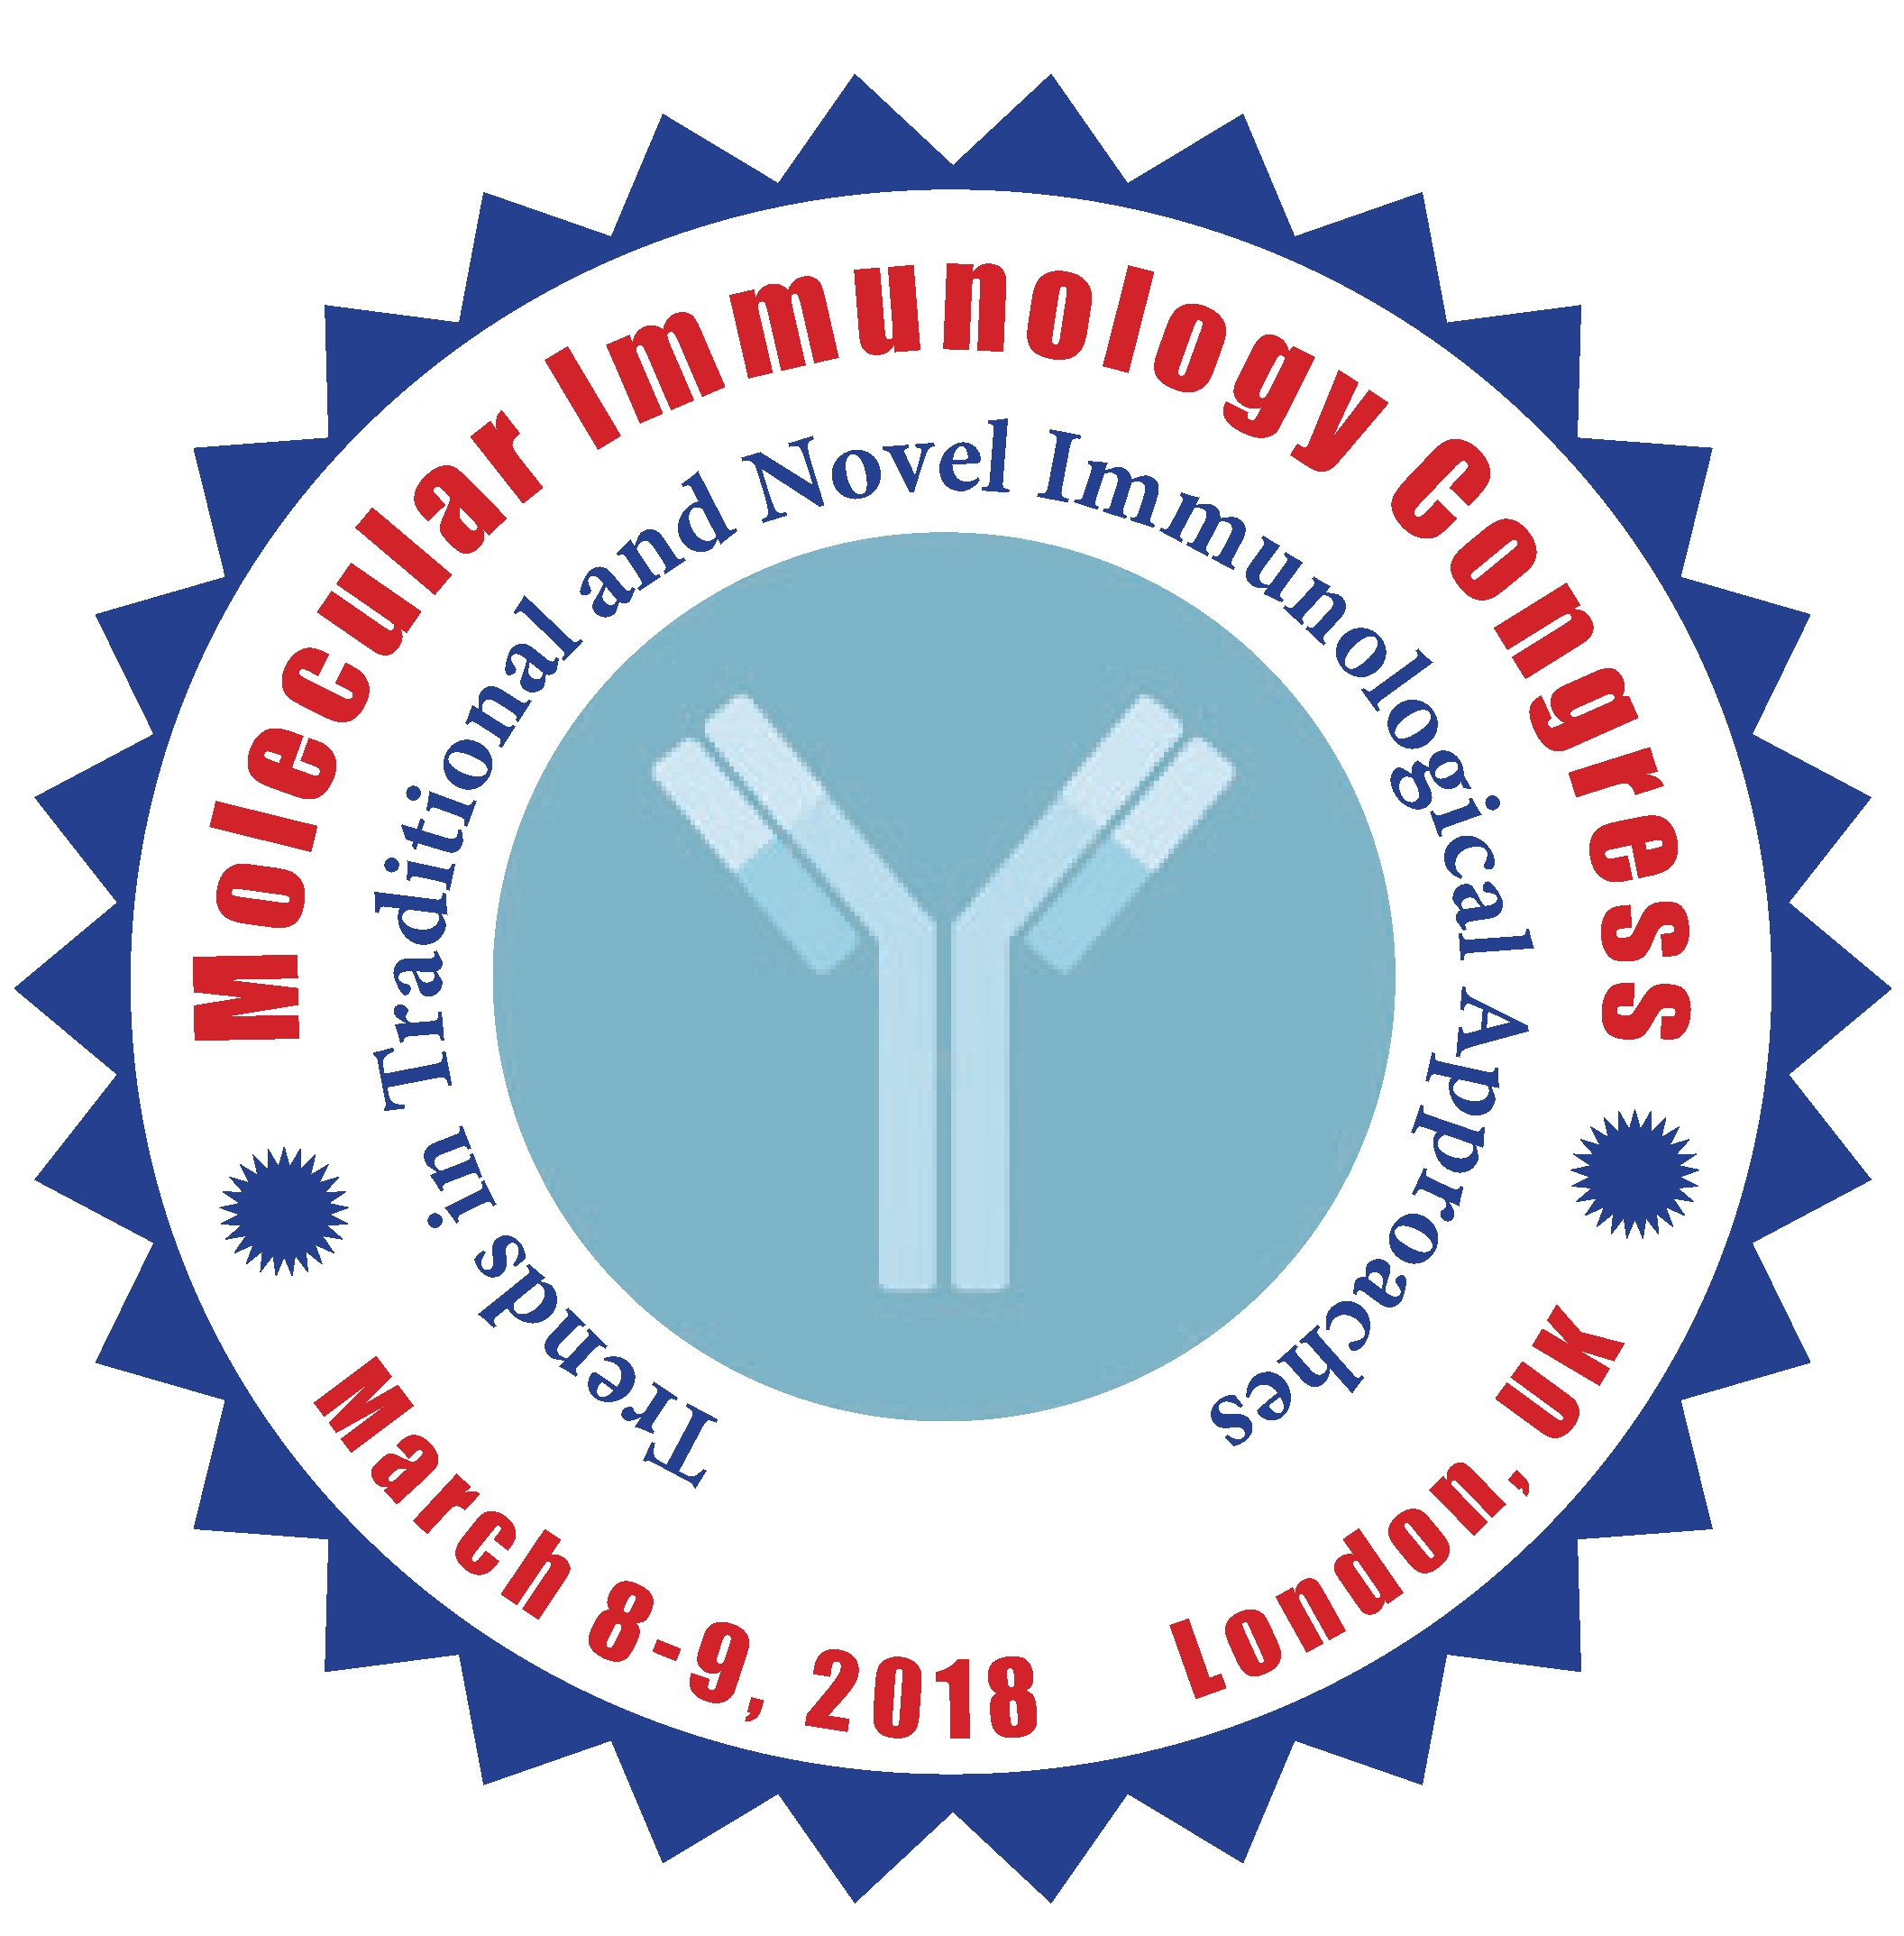 9th Molecular Immunology & Immunogenetics Congress to be held during March 08-09, 2018 in London, UK